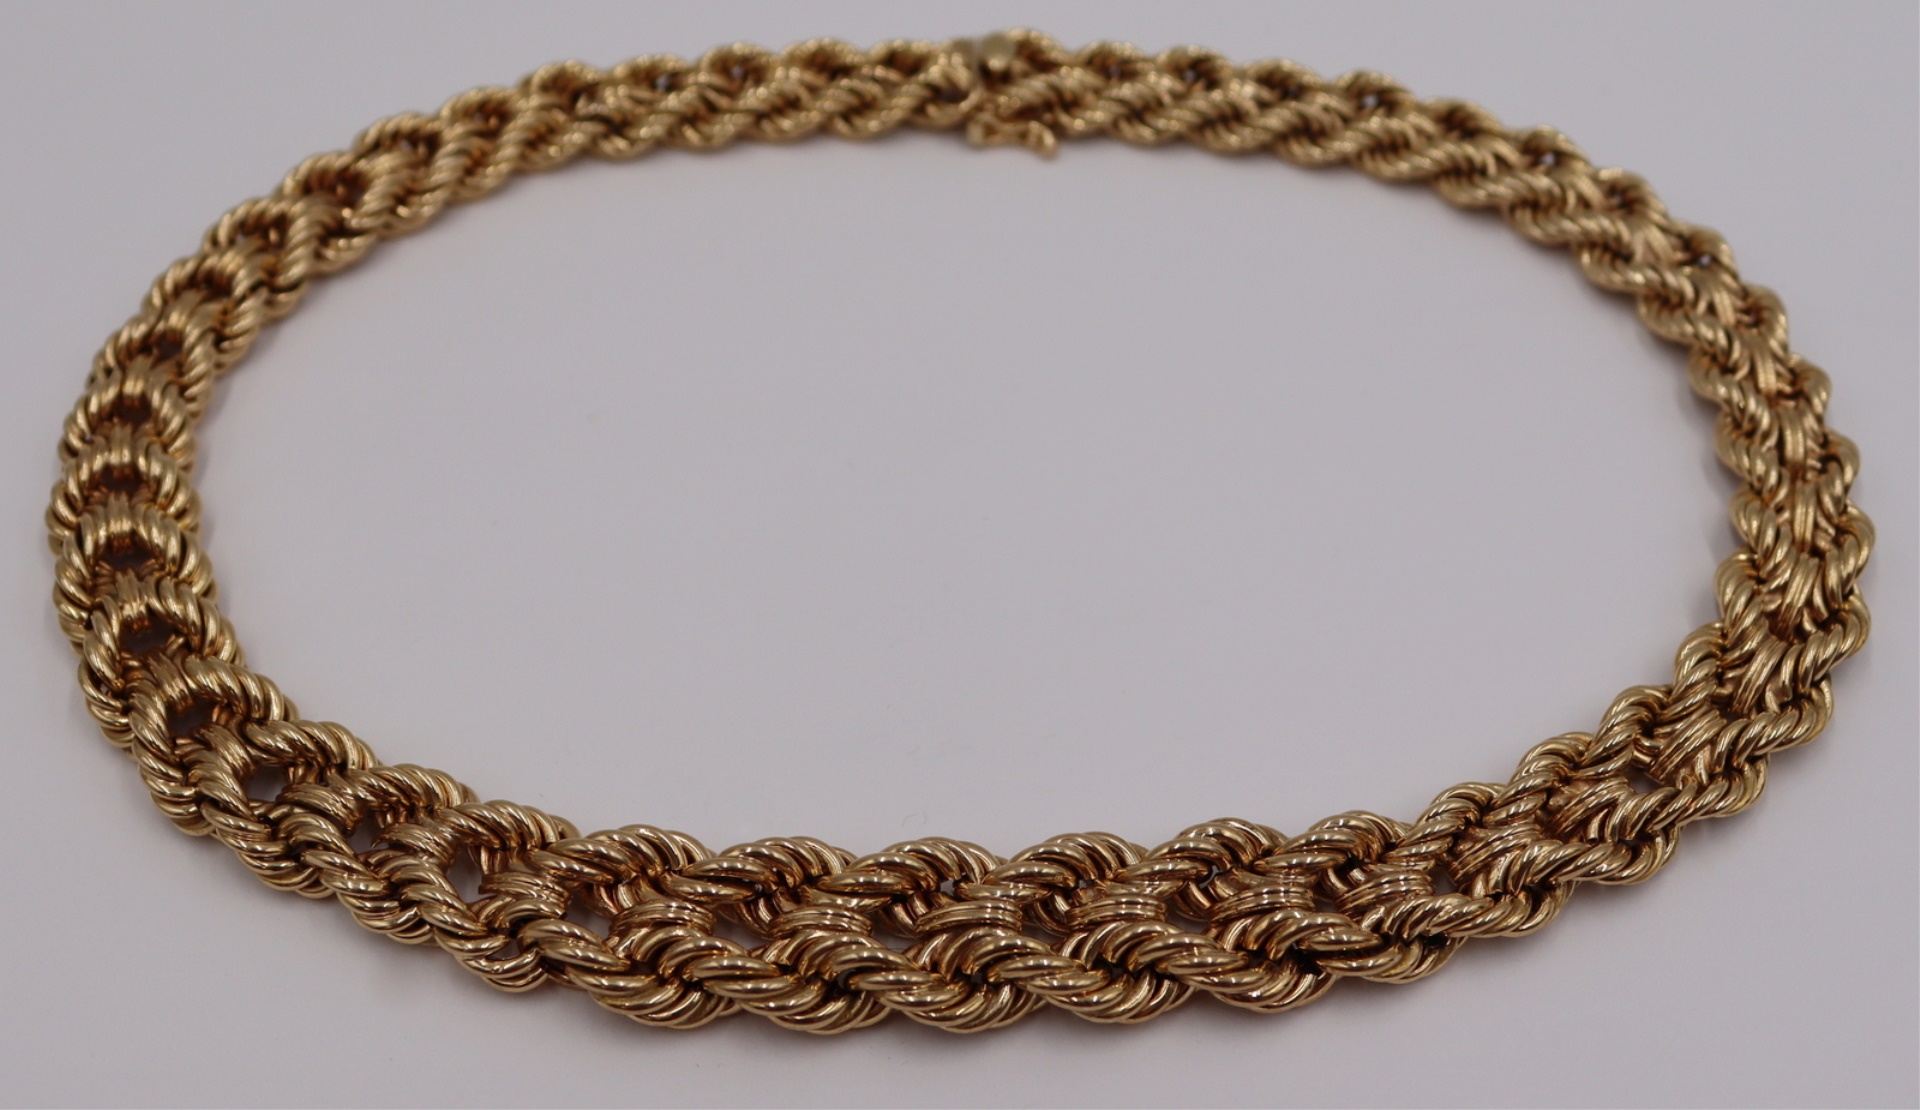 JEWELRY 14KT GOLD GRADUATED WOVEN 3be60b